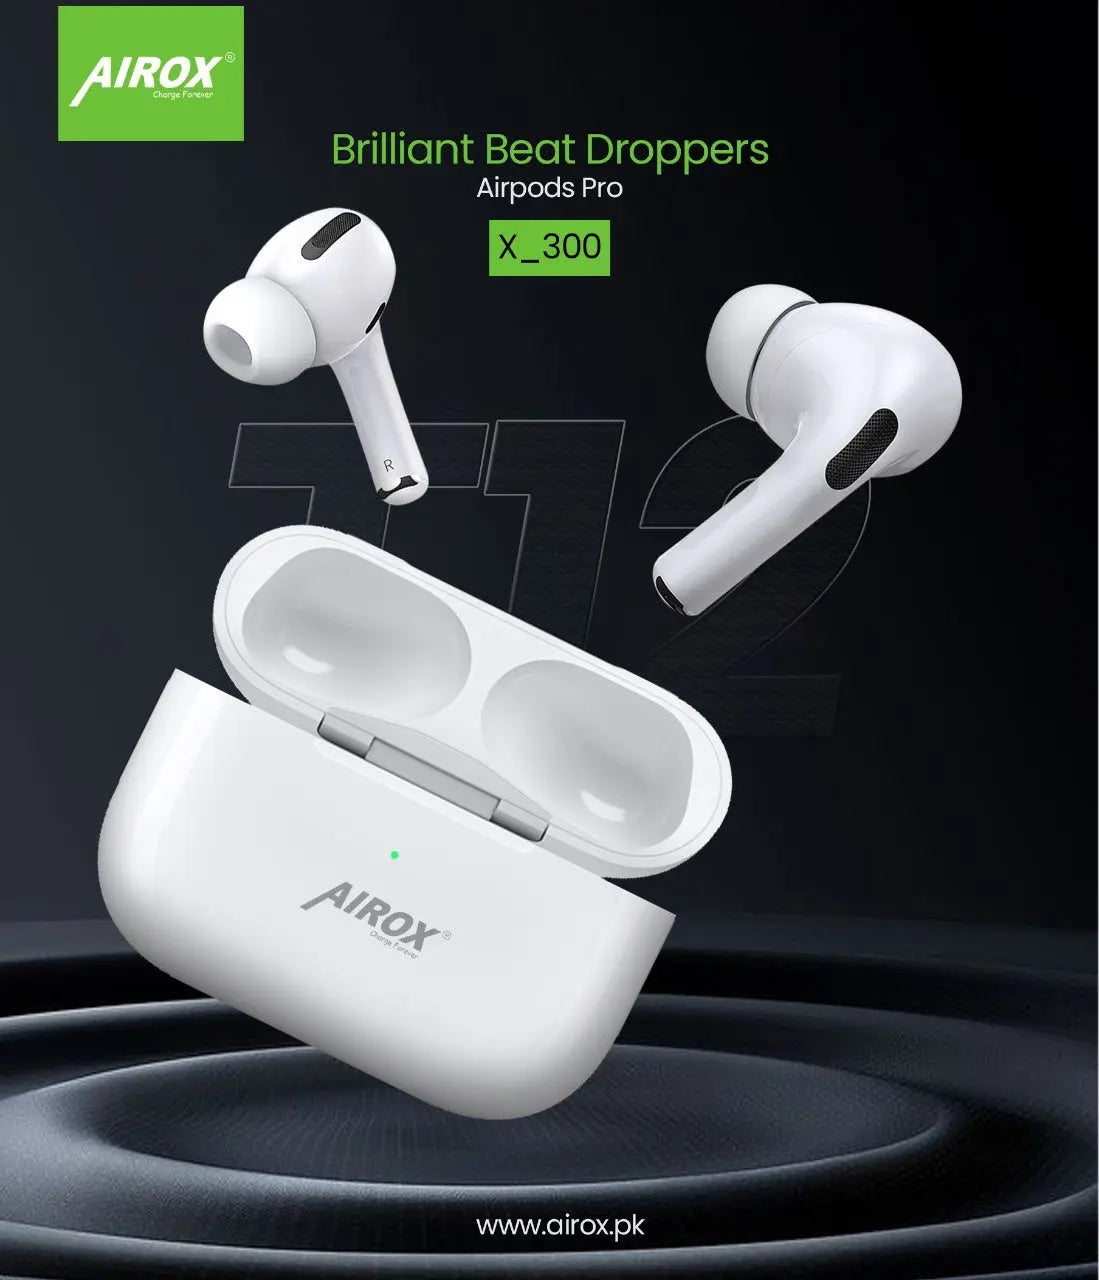 Airox 300 Air-Pods Pro || Premium Quality || 5.0 Version || Longer Battery Time || Free Silicon Case airox.pk